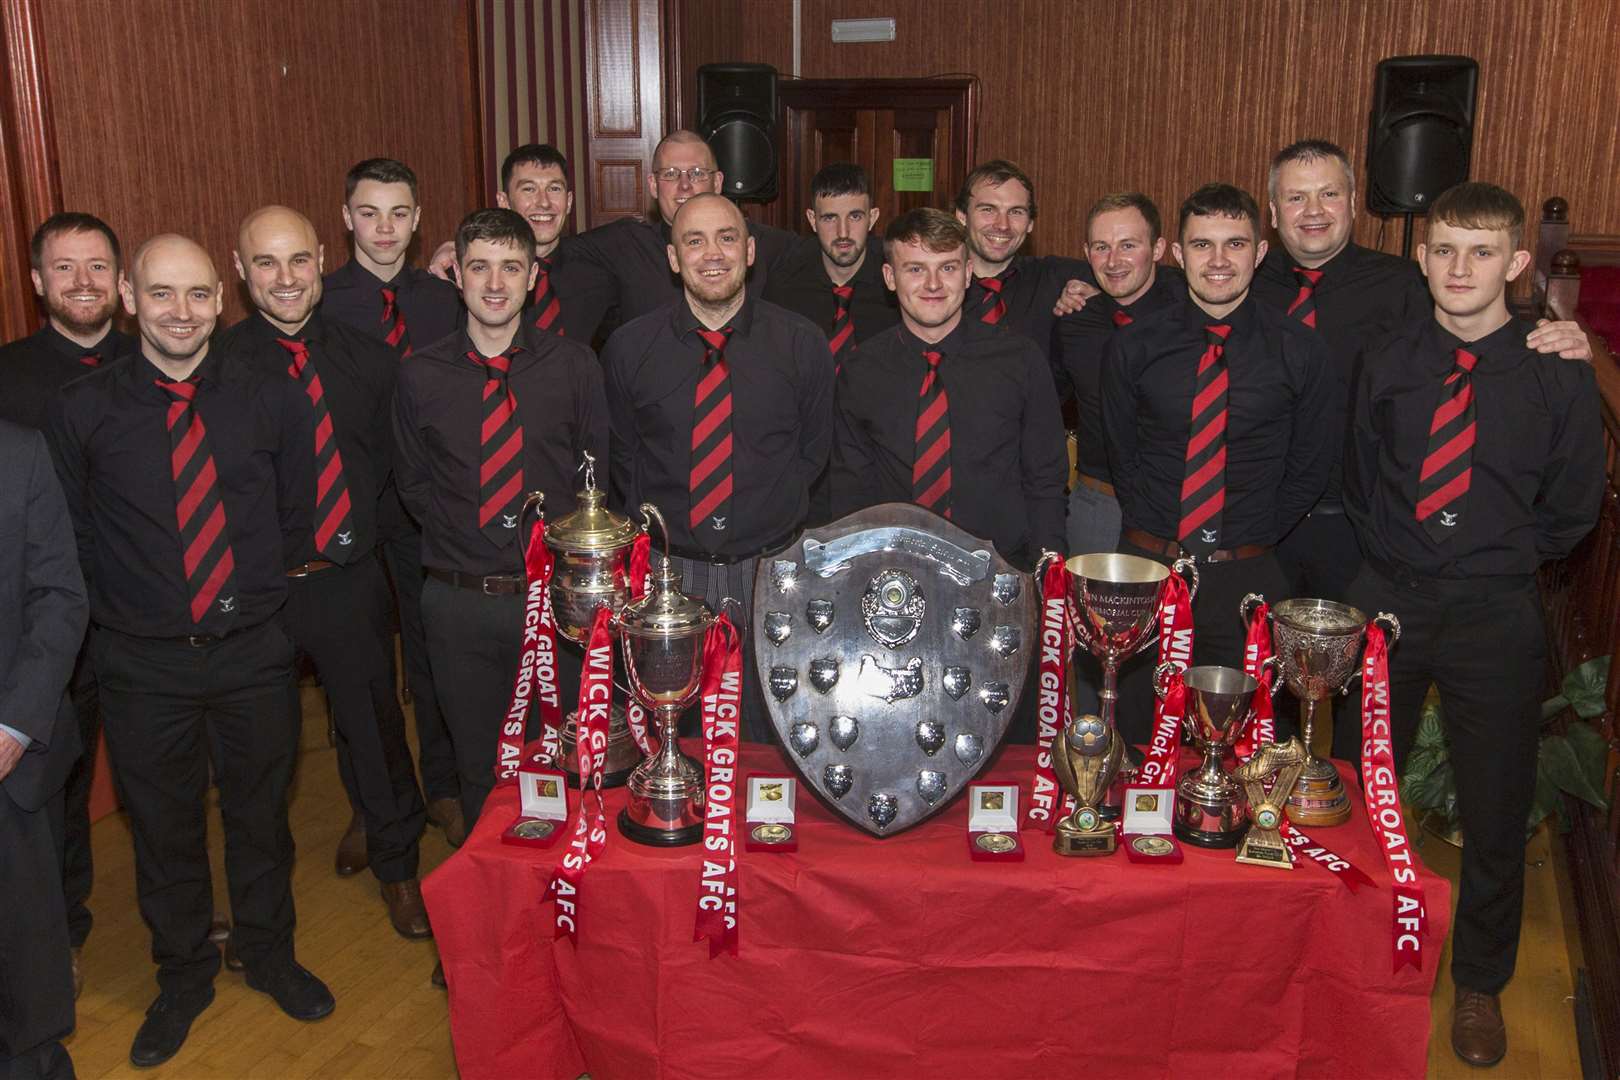 Wick Groats players and management pose for a photo during their annual awards night in the Seaforth Highlanders' Club on Saturday. They had a clean sweep of all the trophies on offer in the various competitions they played in, taking home the David Allan Shield, Colin Macleod Memorial Cup, Eain Mackintosh Cup, the Caithness Division One trophy, the Wick League title and the Highland Amateur Cup, which they have now won four times in the last seven years. Pictures: Robert MacDonald / Northern Studios